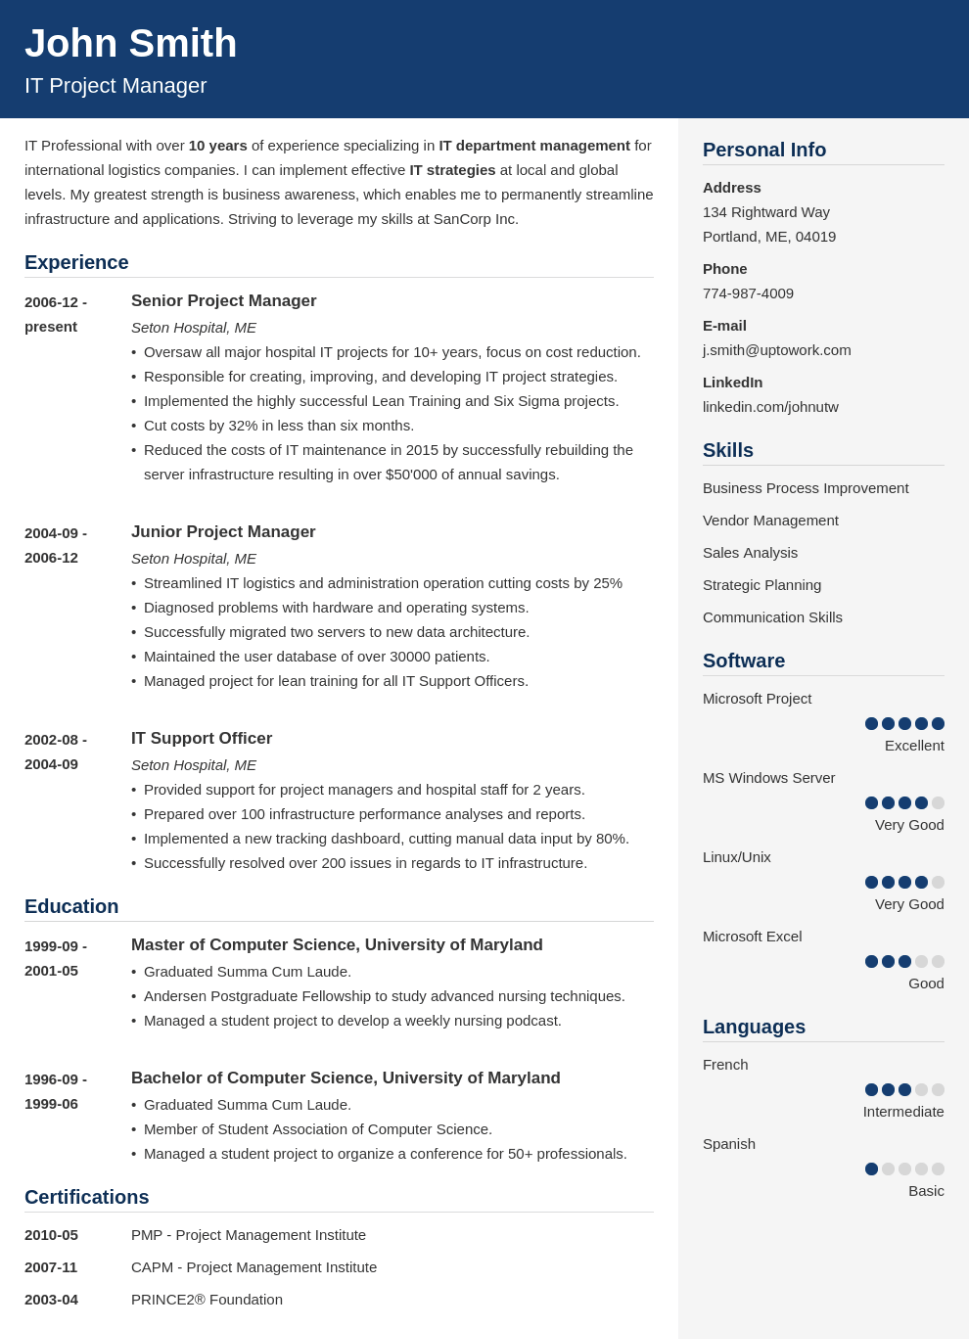 50 Free Resume Examples Professional Sample Resumes For All Jobs